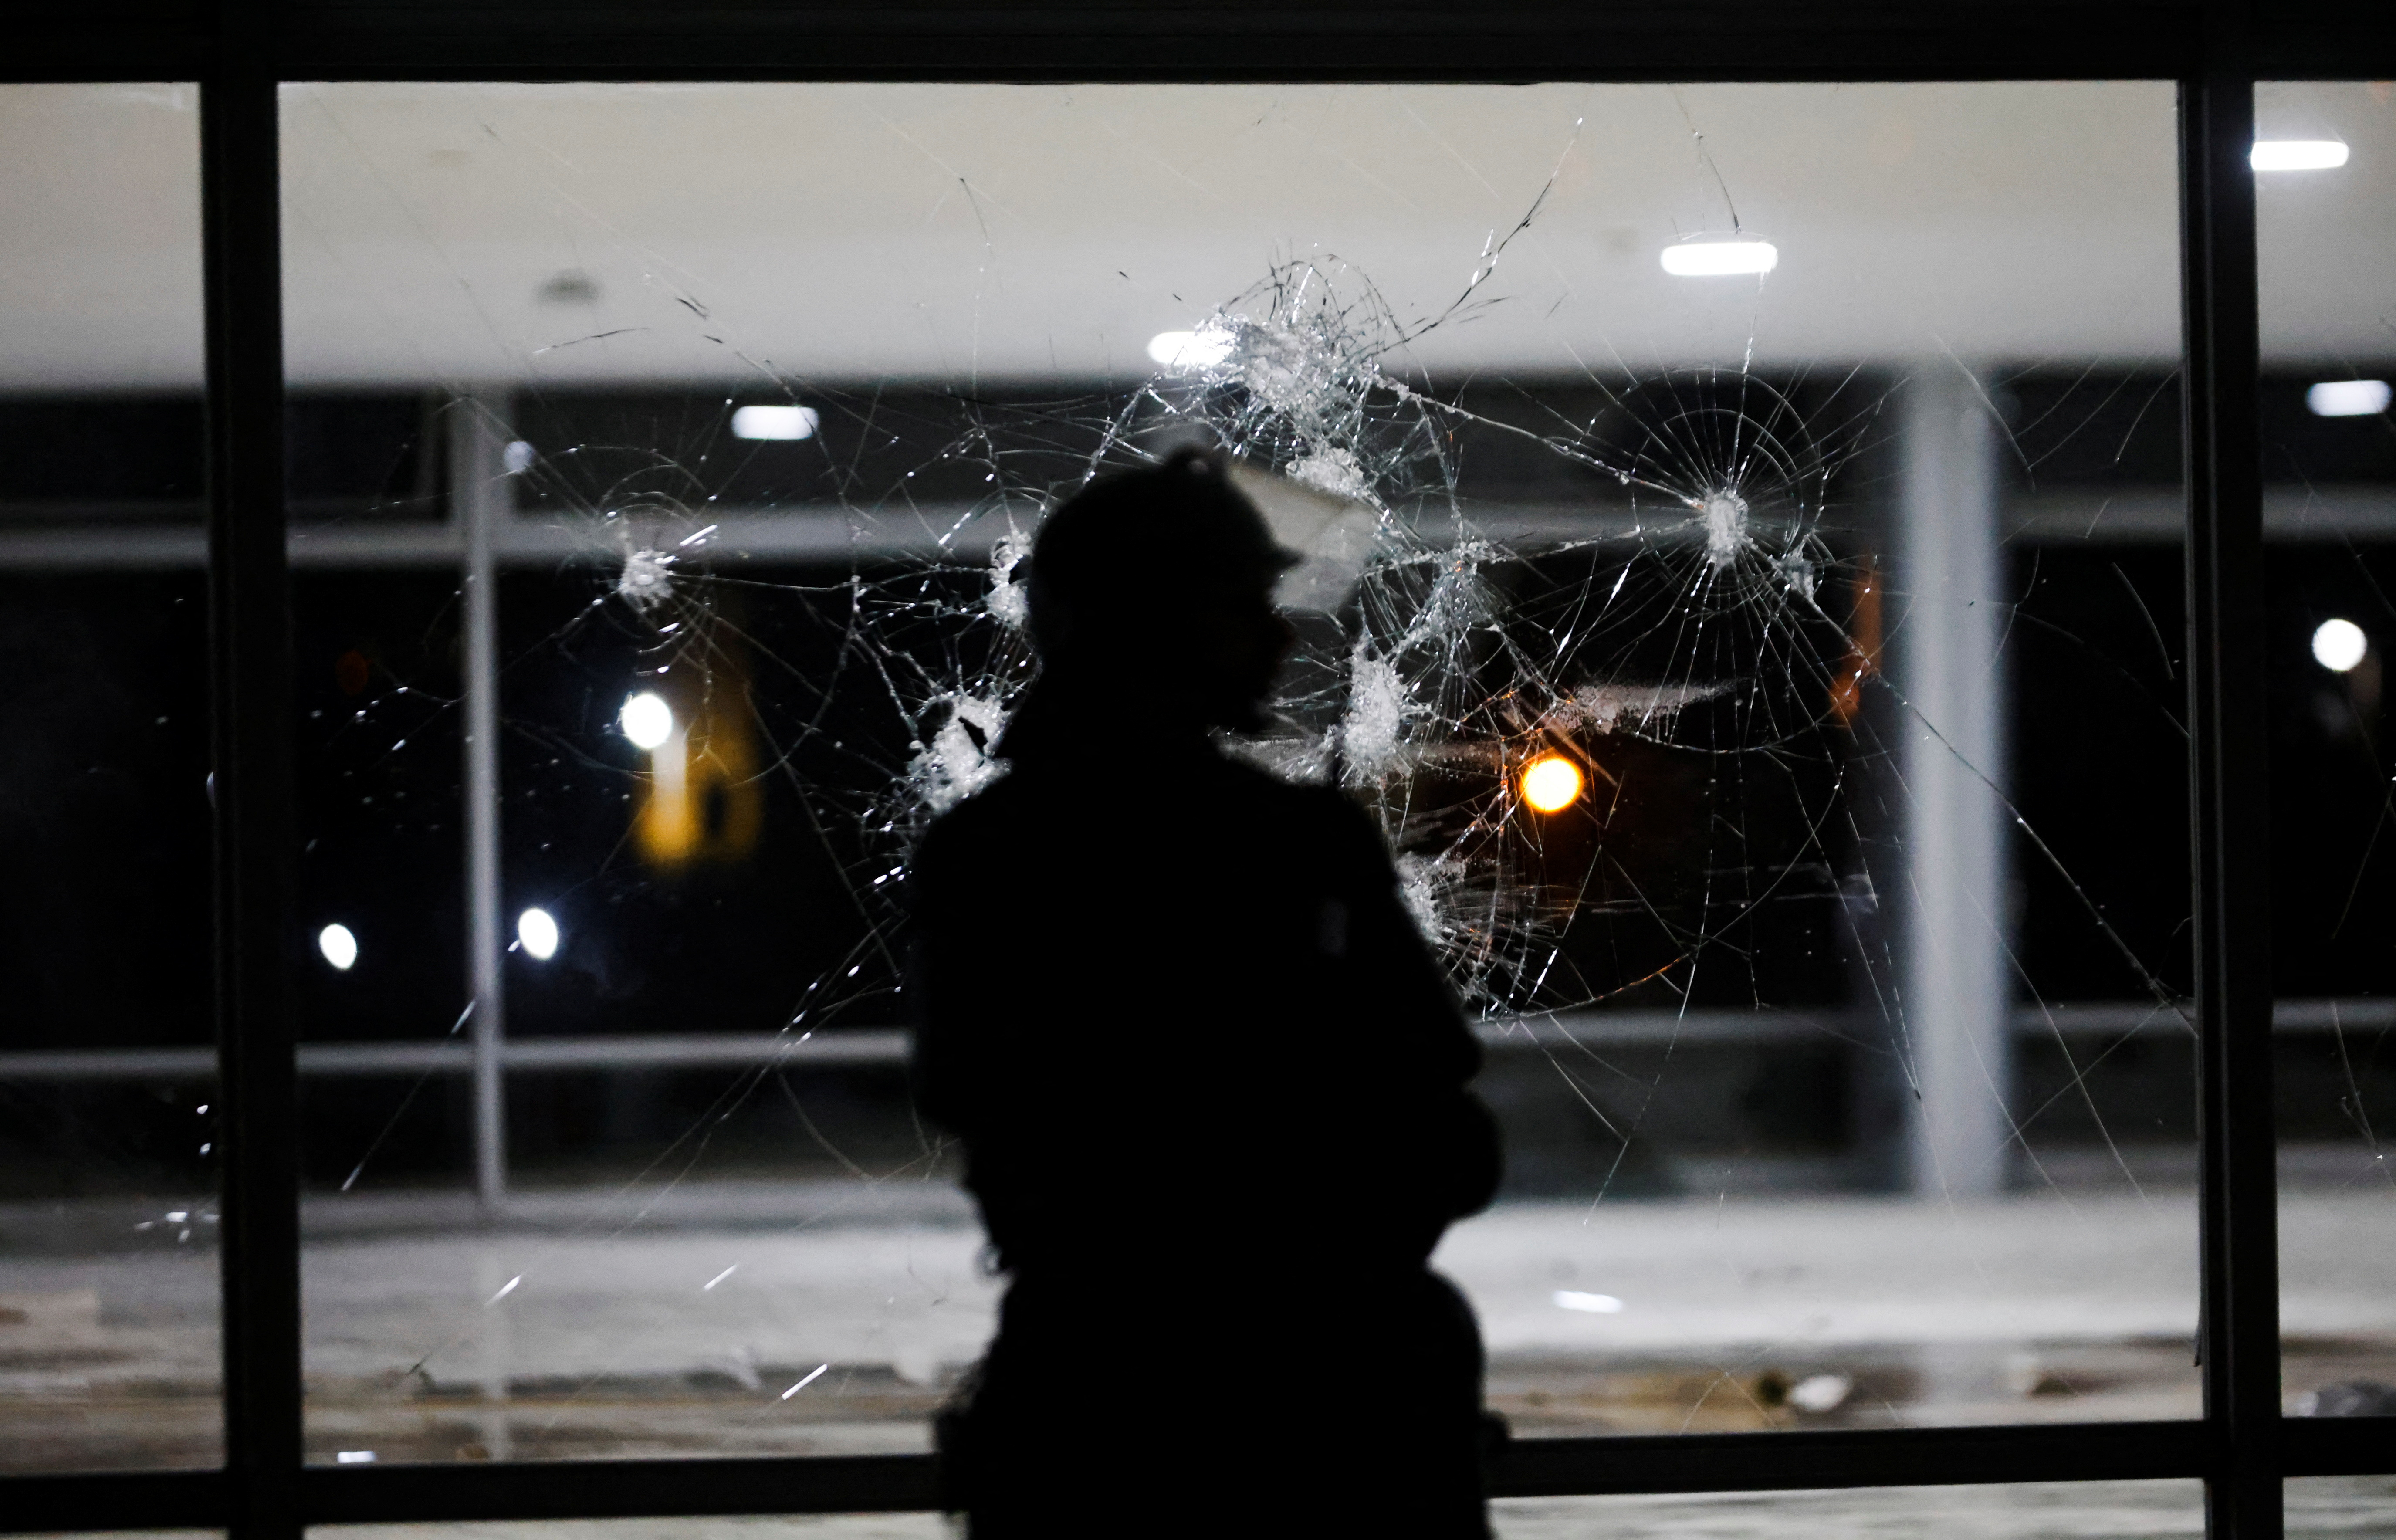 A soldier stands in front of a broken glass panel at Planalto Palace following a protest by supporters of Brazil's former President Jair Bolsonaro against President Luiz Inacio Lula da Silva, in Brasilia, Brazil, January 8, 2023. REUTERS/Adriano Machado